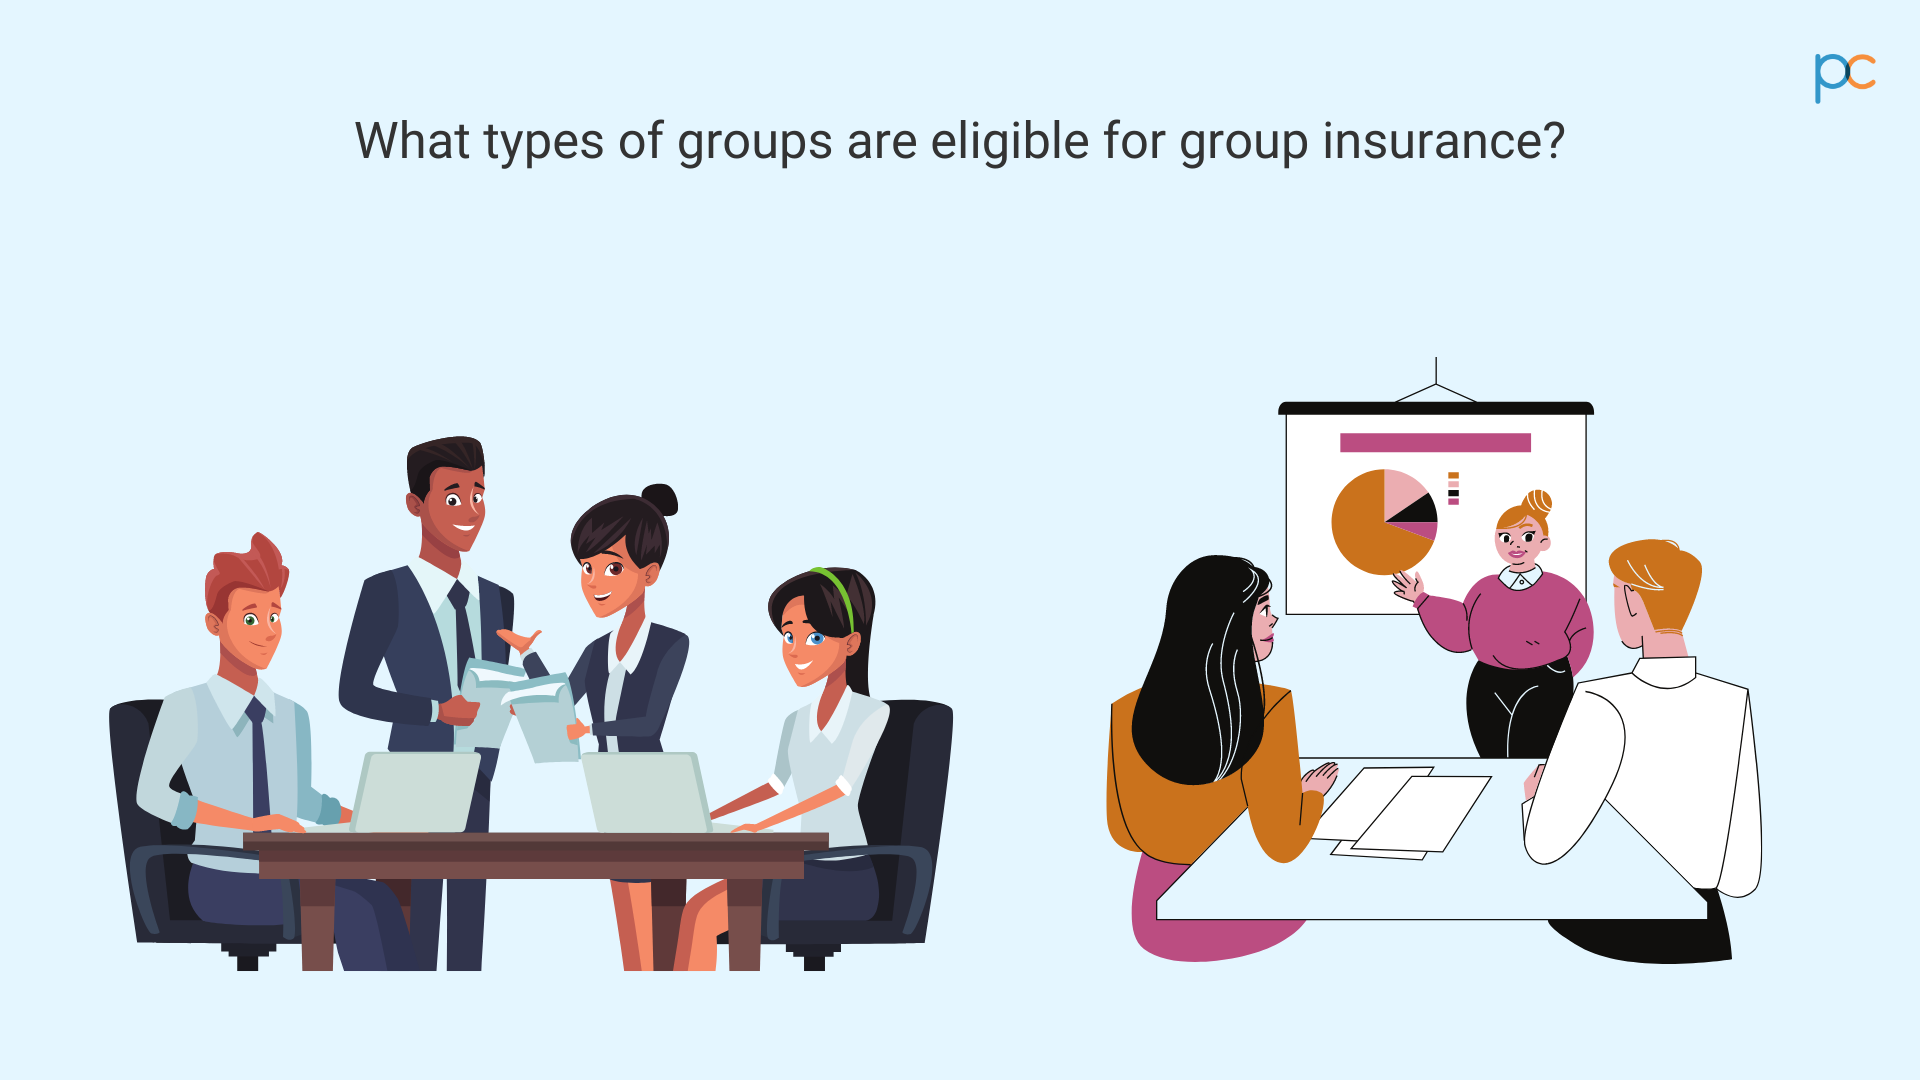 What types of groups are eligible for group insurance